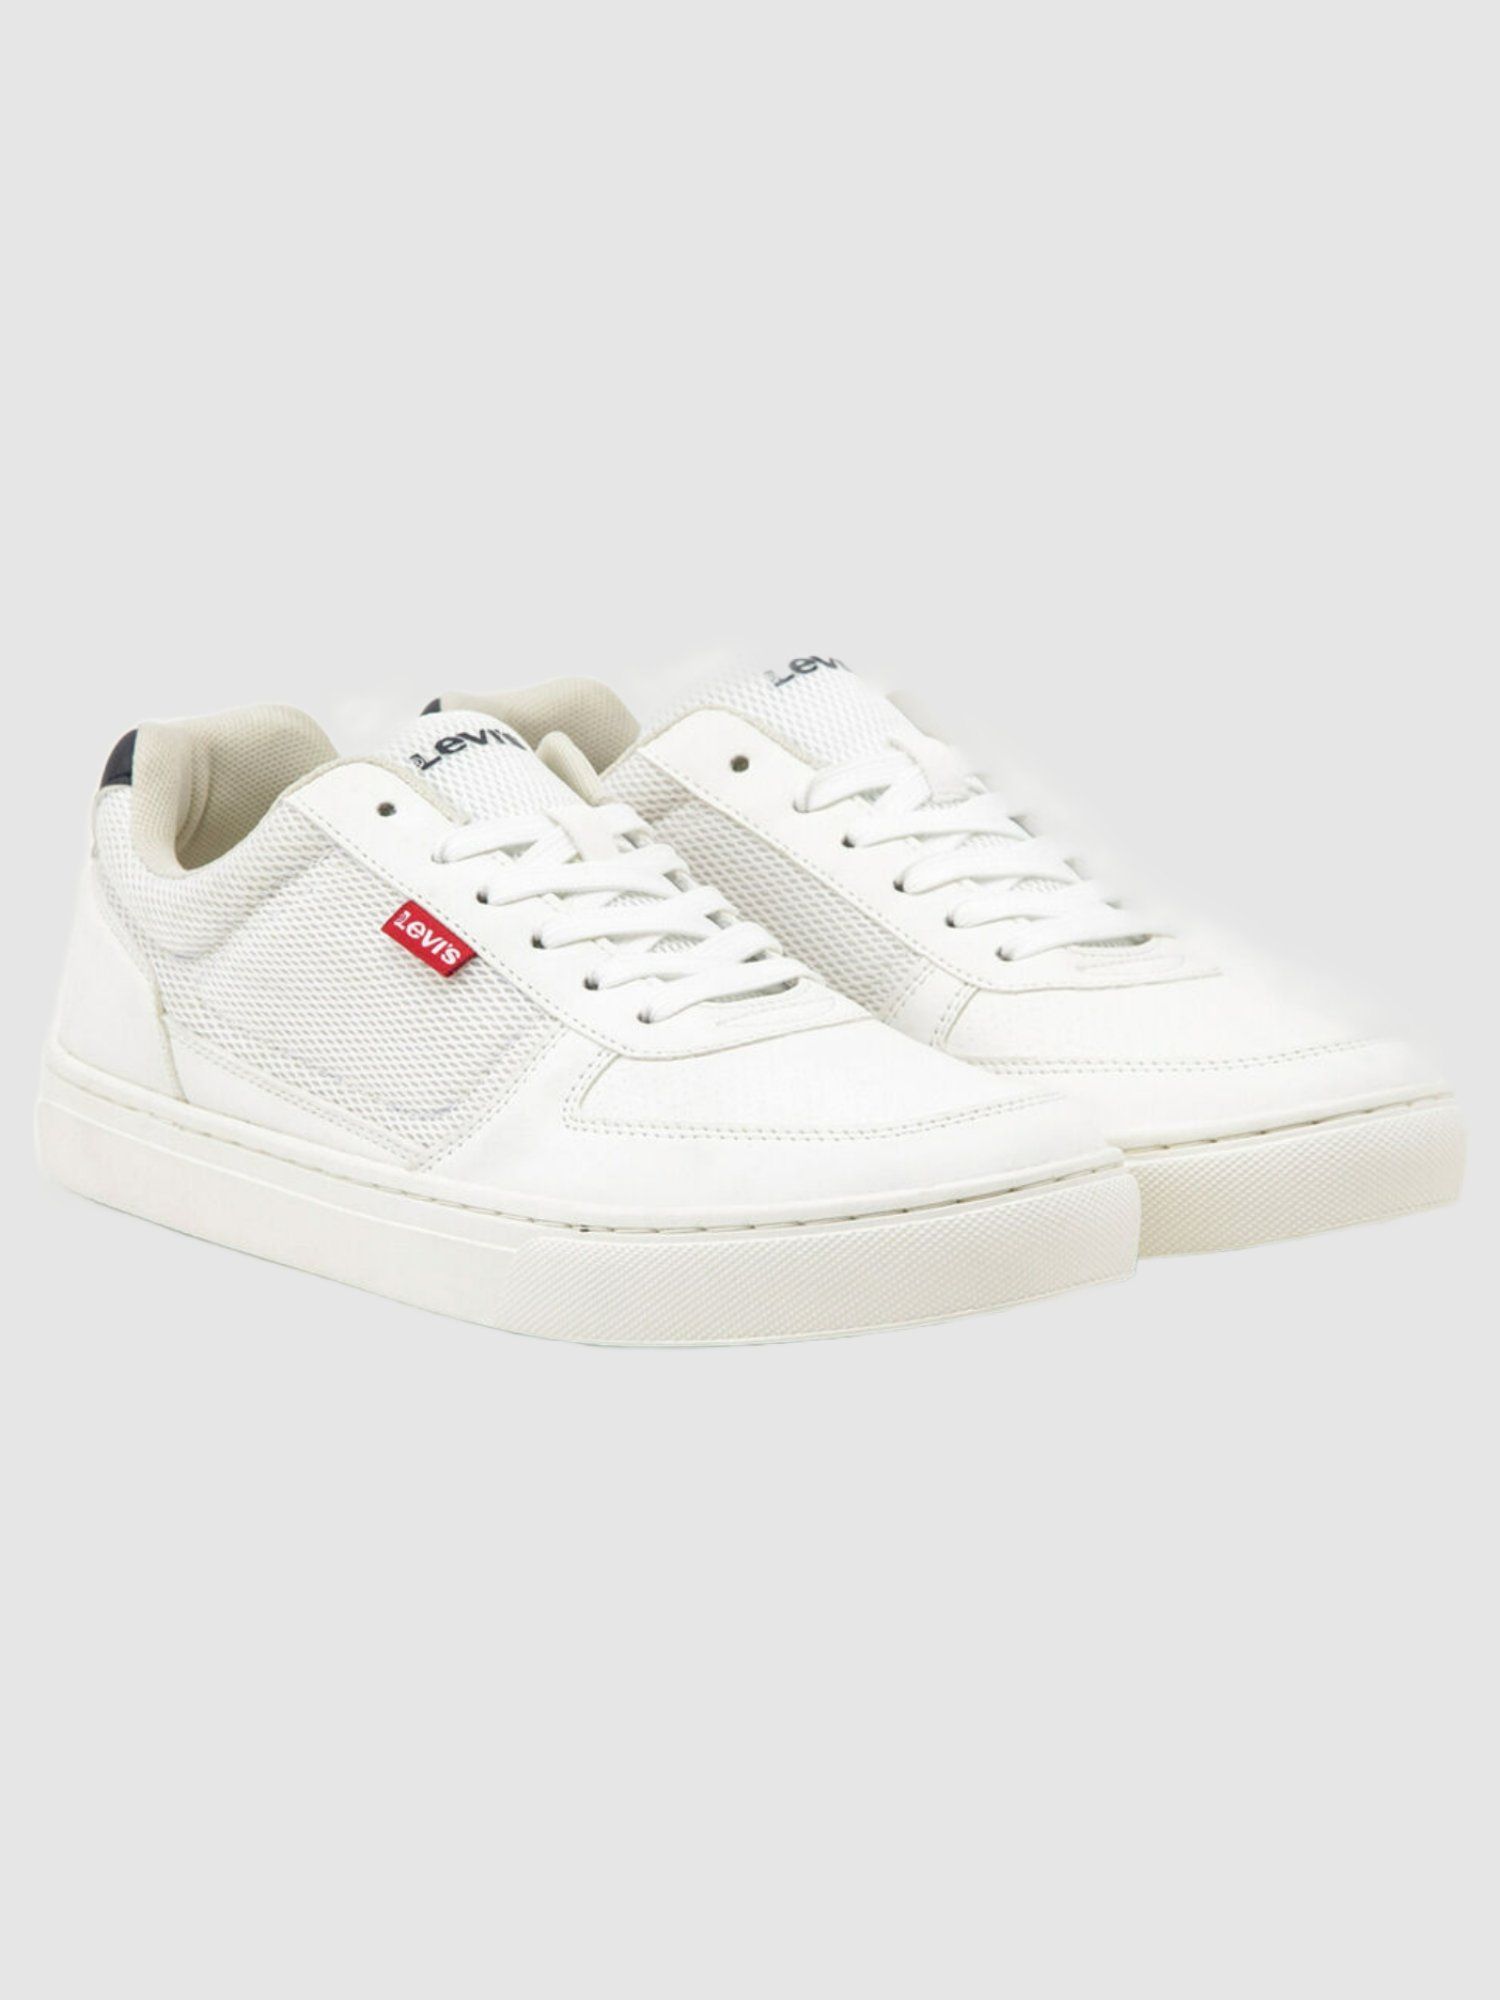 Discover 112+ levis white sneakers